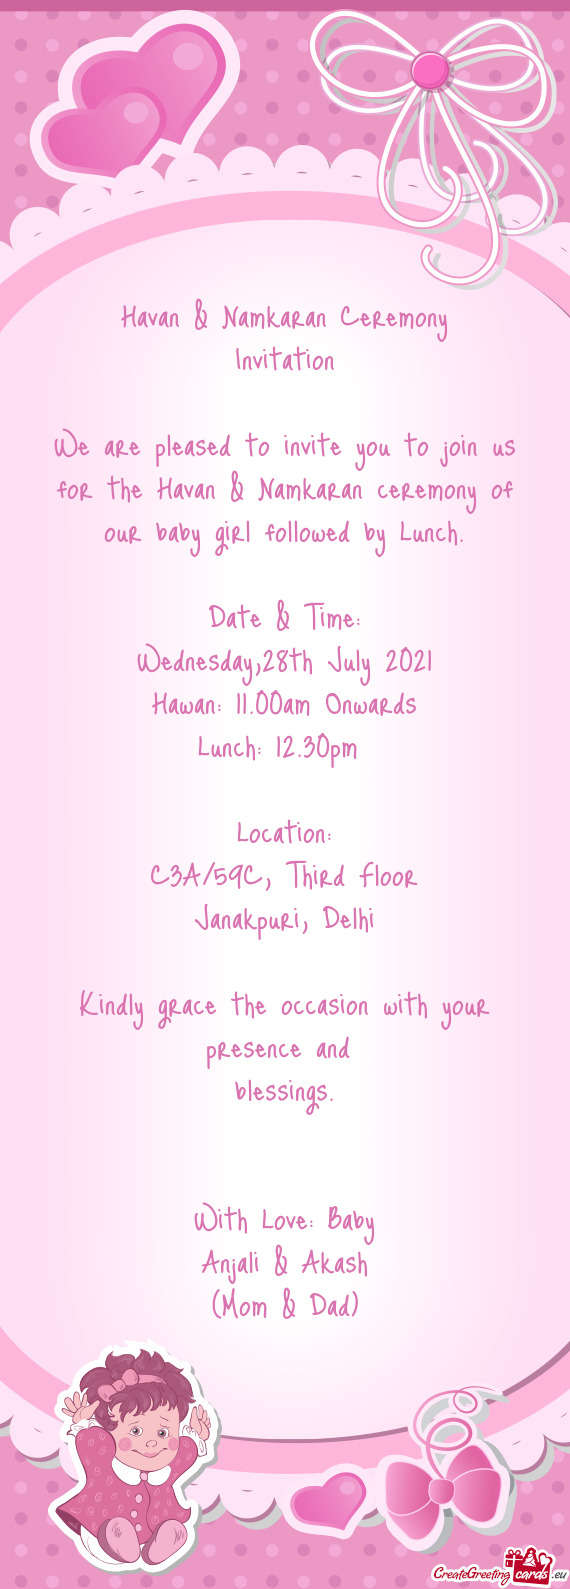 We are pleased to invite you to join us for the Havan & Namkaran ceremony of our baby girl followed